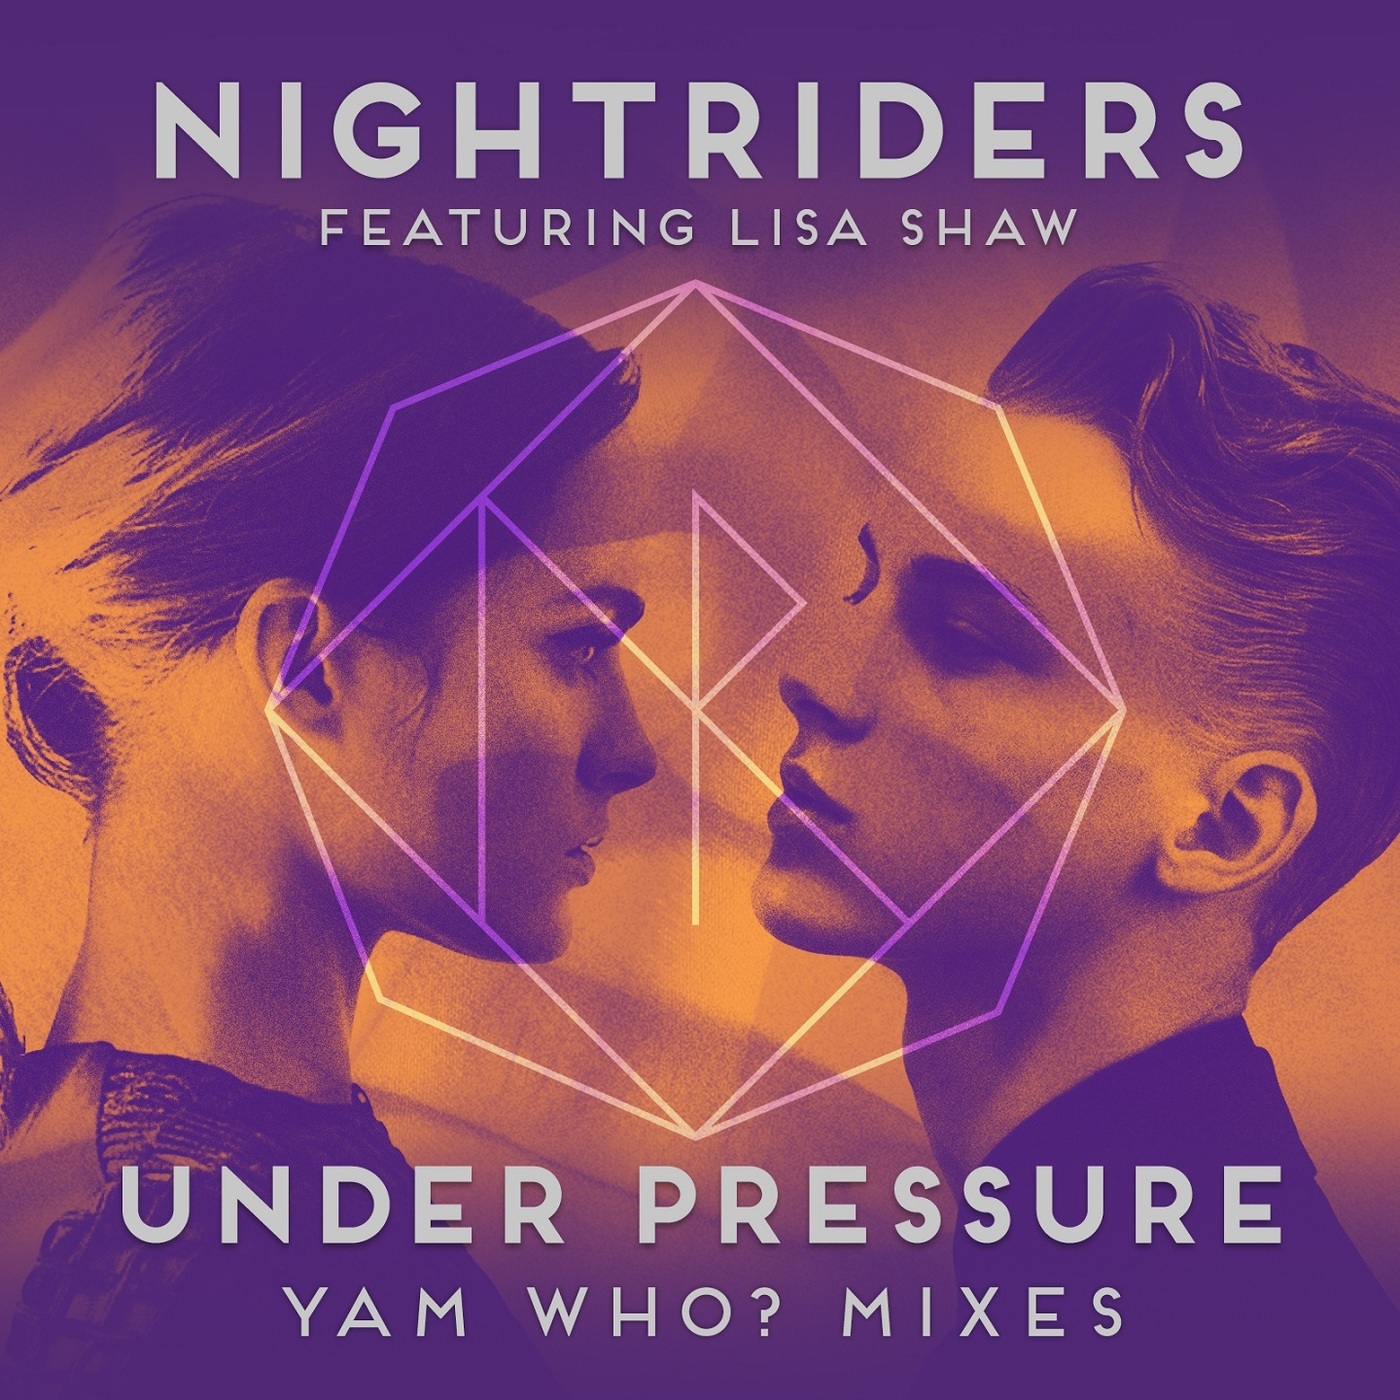 Nightriders ft Lisa Shaw - Under Pressure (Yam Who? Mixes) / KID Recordings